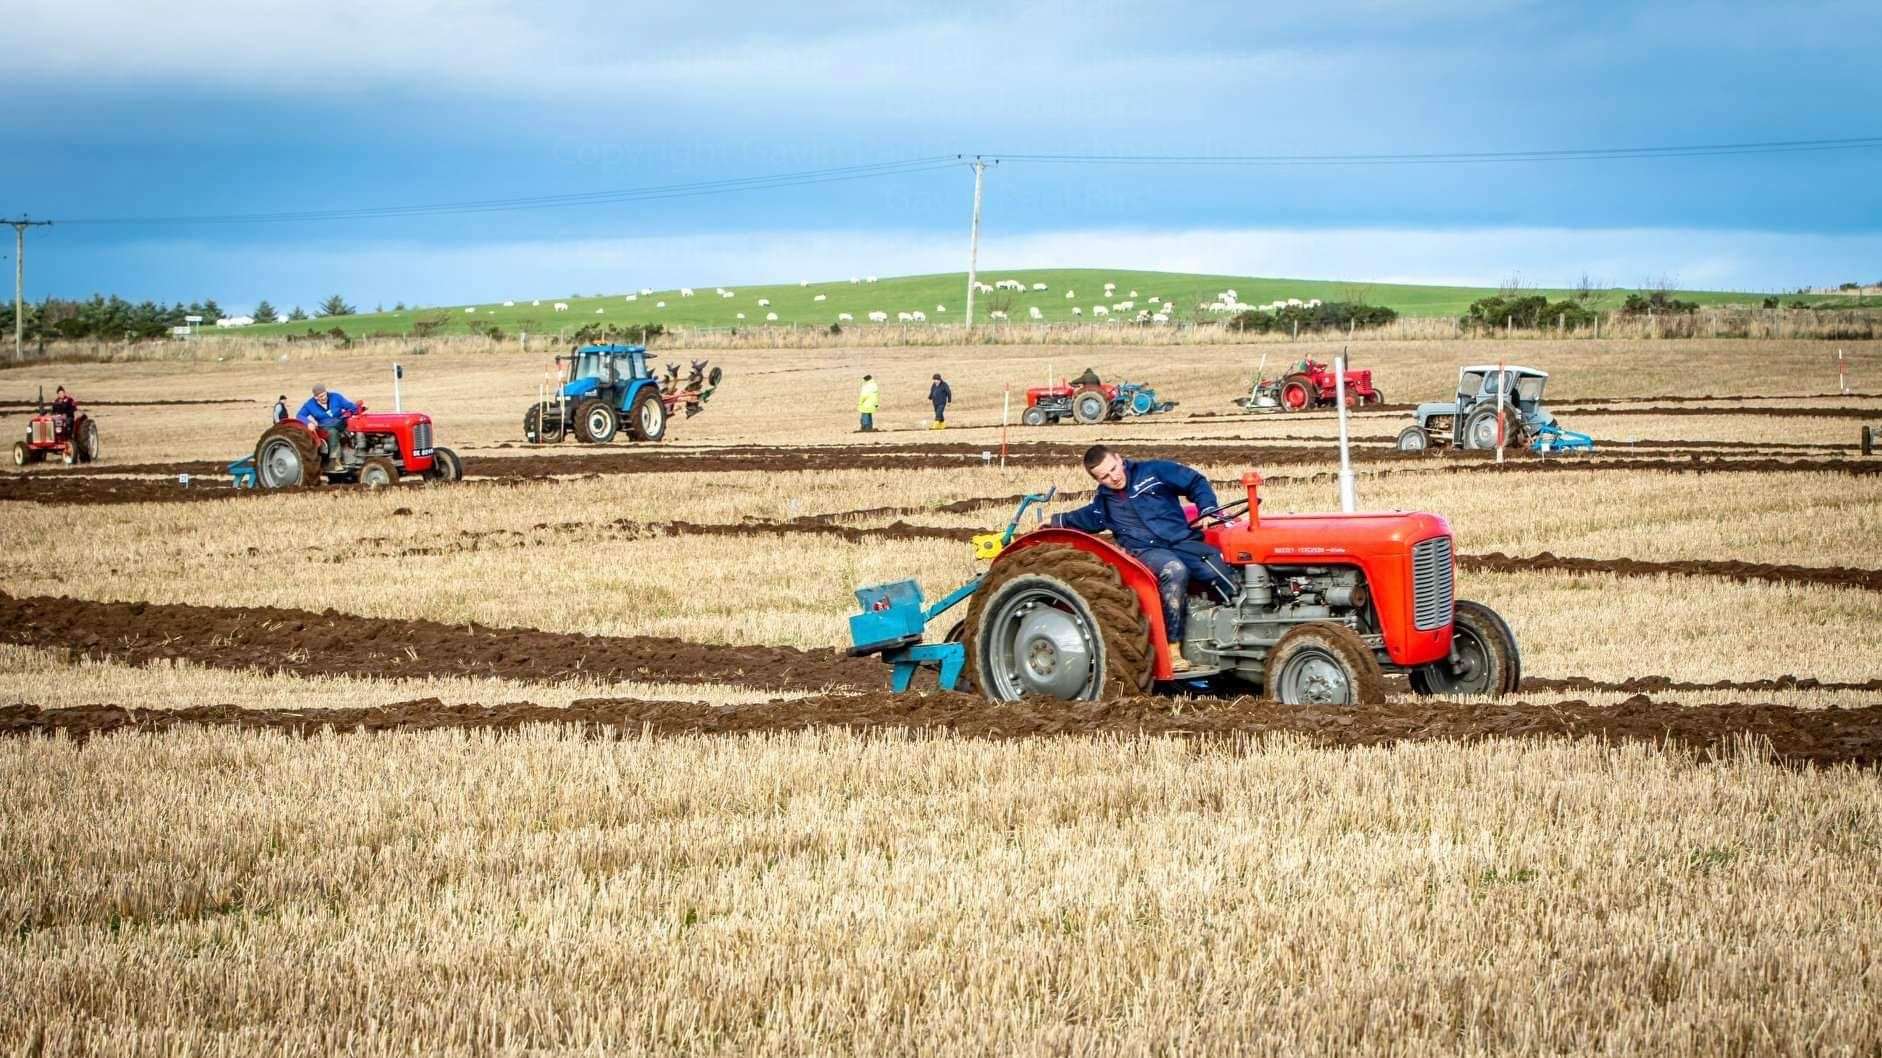 The annual charity vintage ploughing match is being held this weekend at Dixonfield Farm near Thurso.